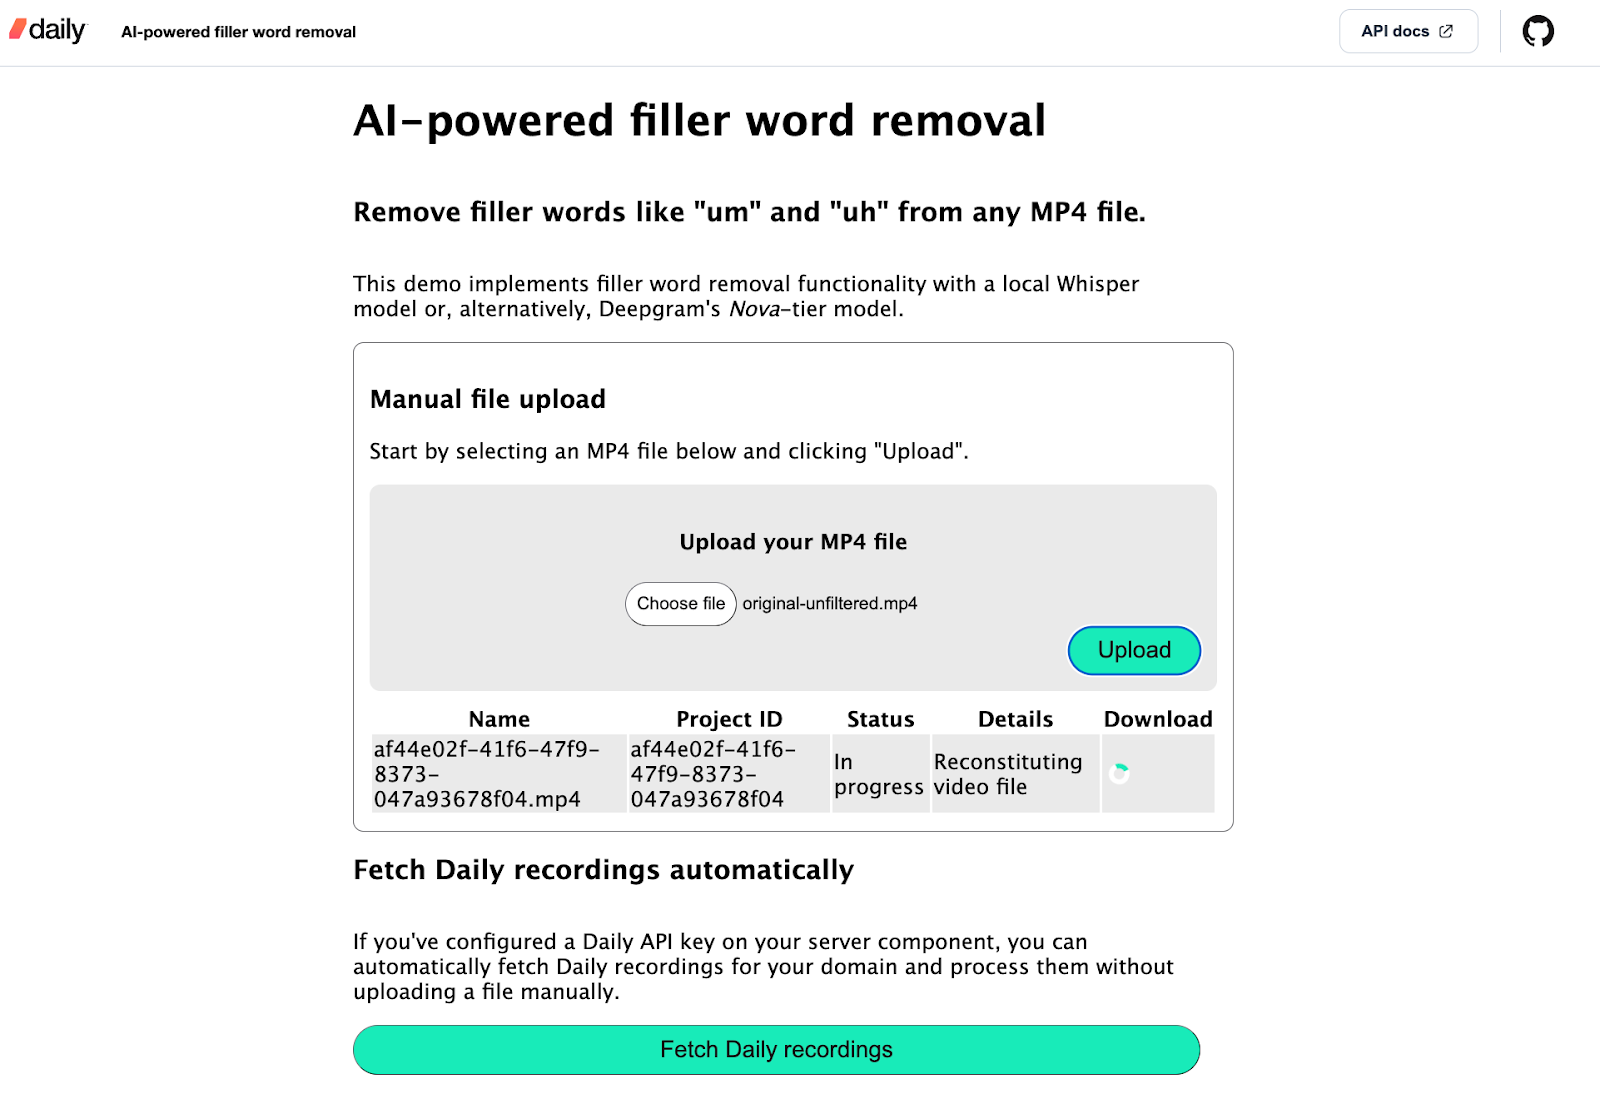 AI-assisted removal of filler words from video recordings